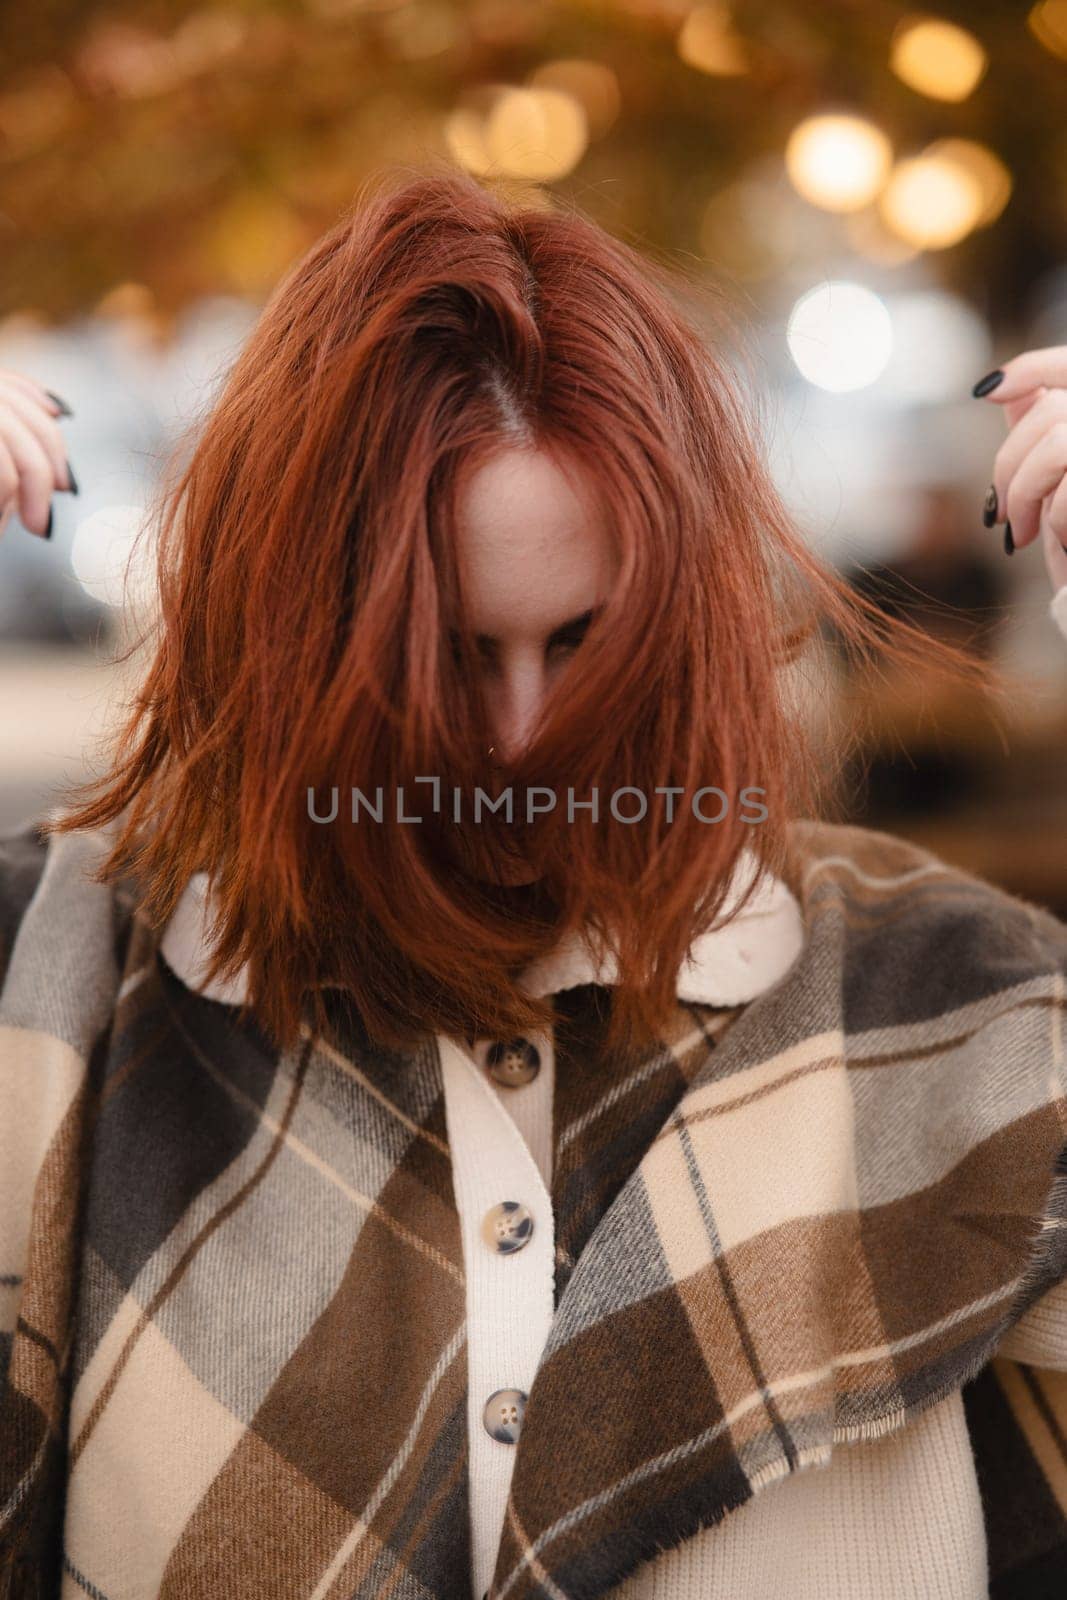 A lively redhead captivating attention with her hippie ensemble on an autumn day. High quality photo